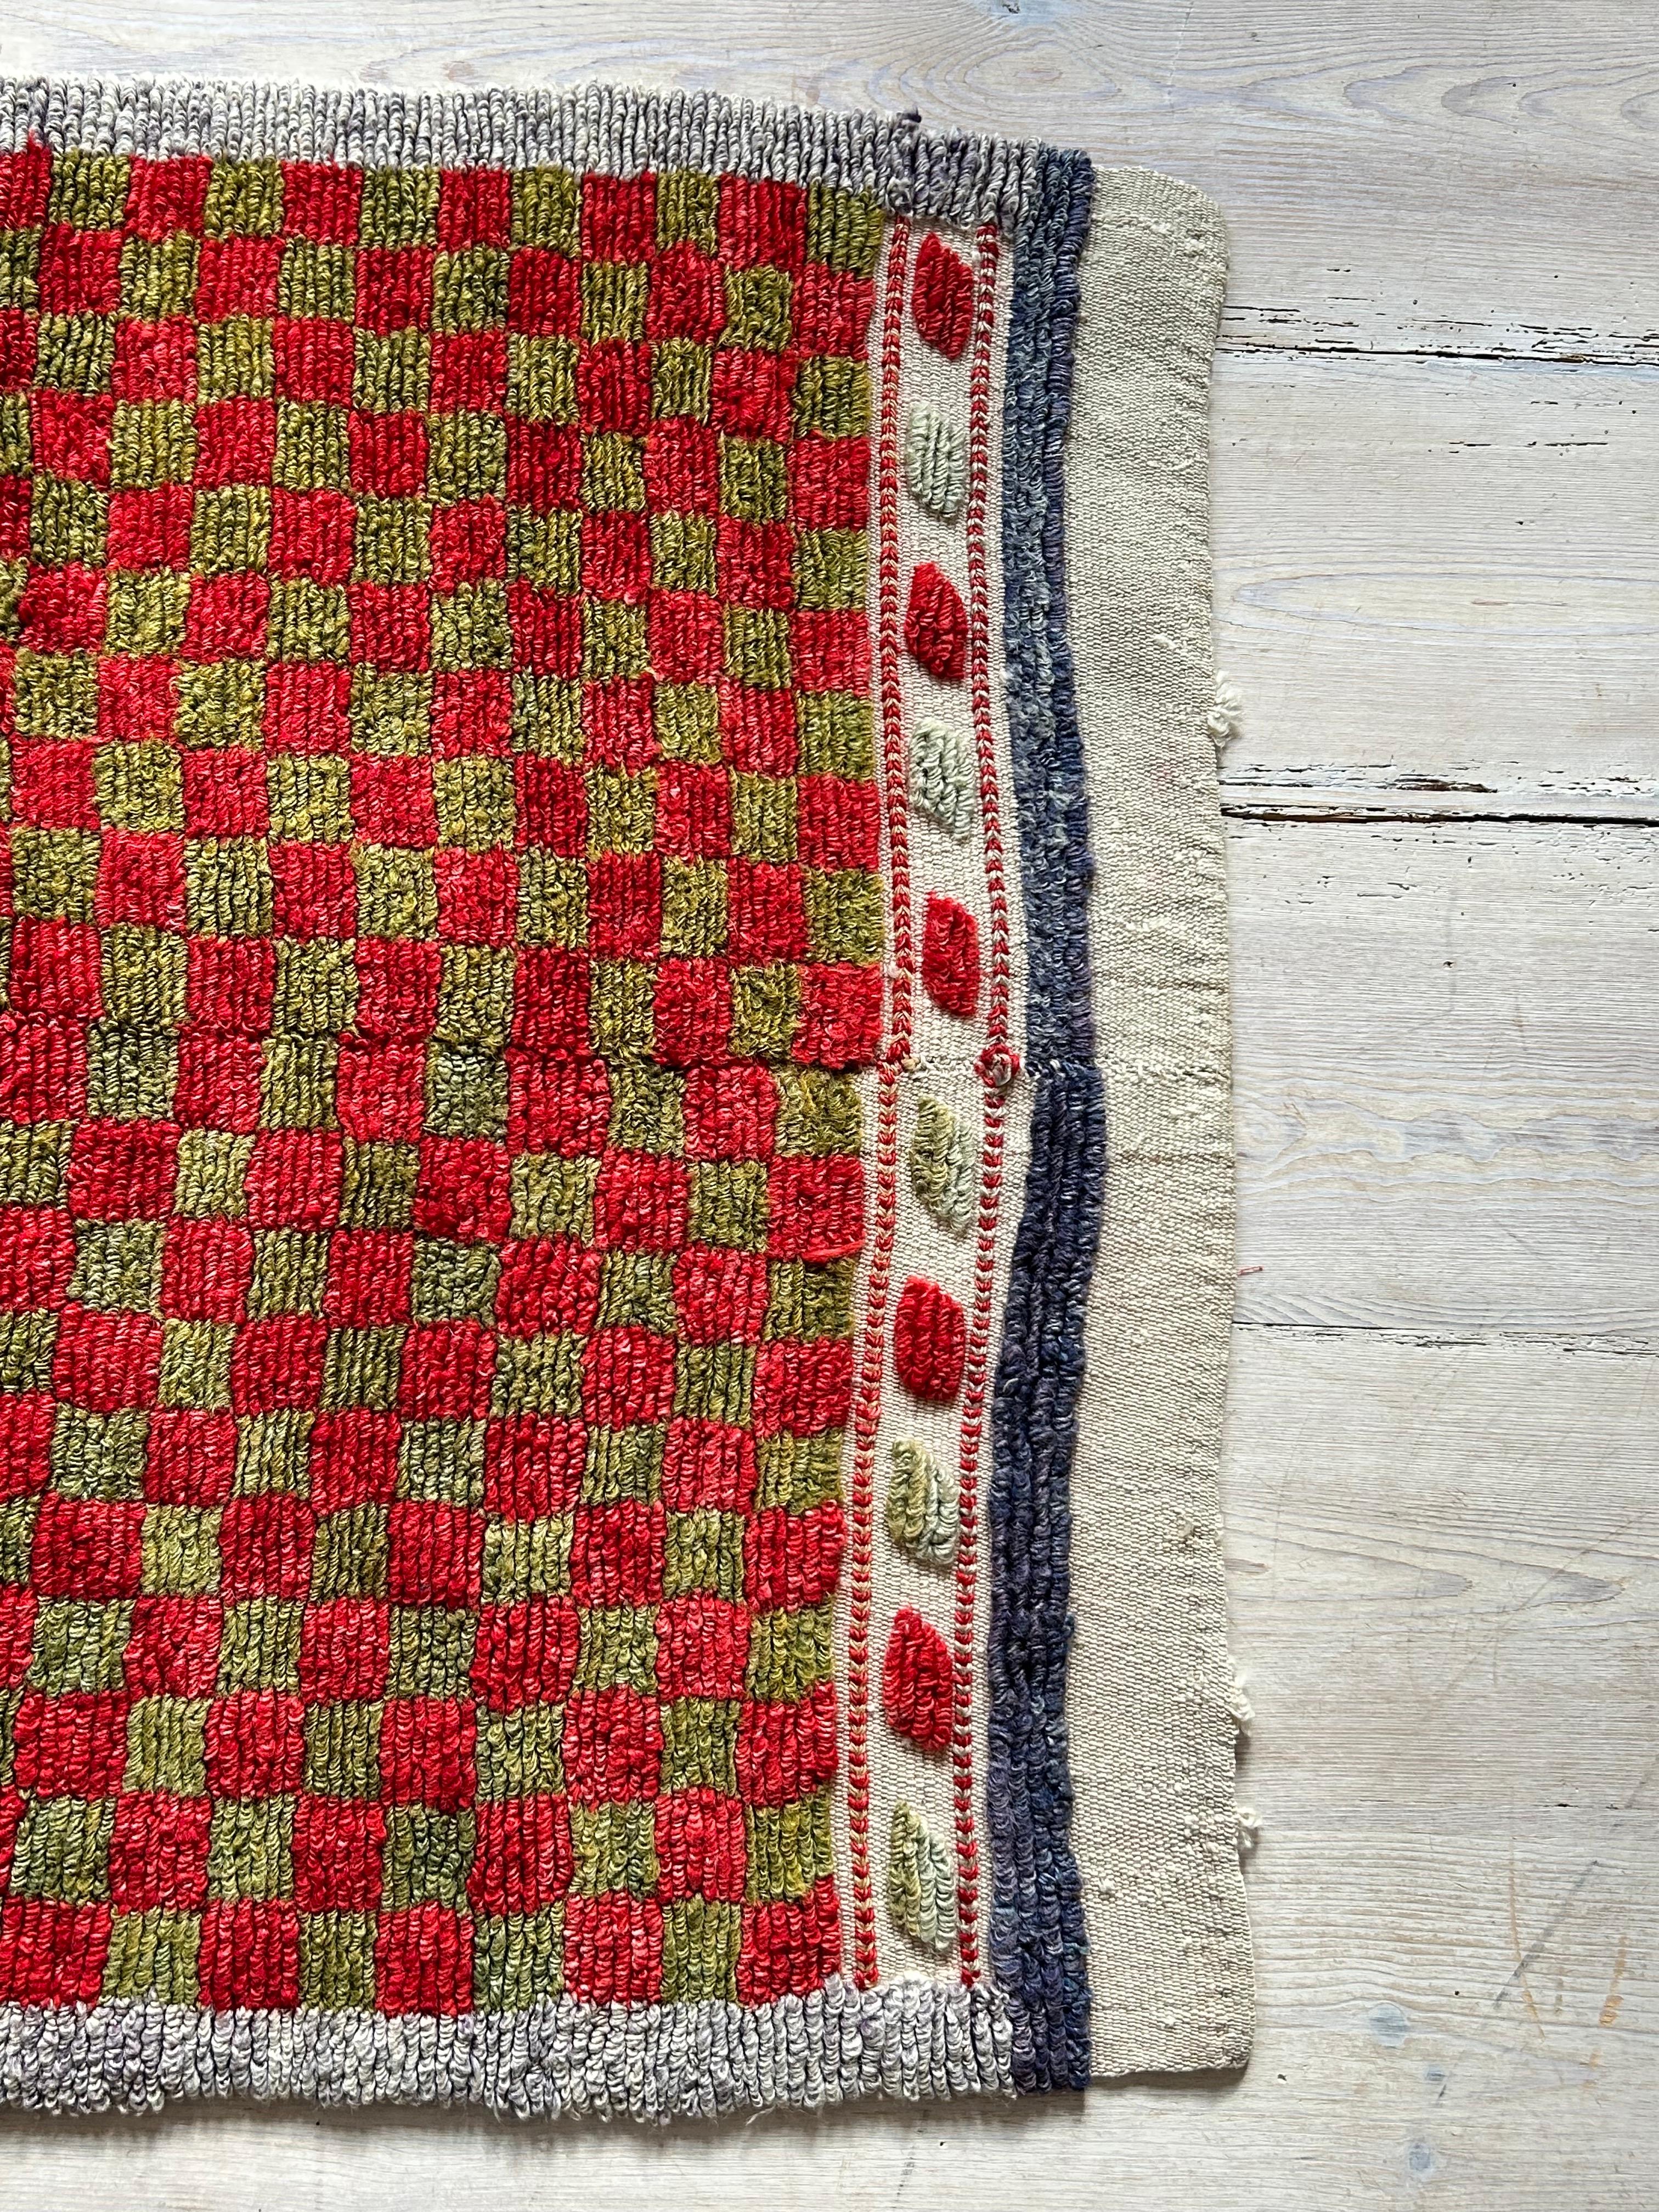 Vintage Angora Loop Pile Rug in Red & Green Check Pattern, Turkey, 20th Century For Sale 2